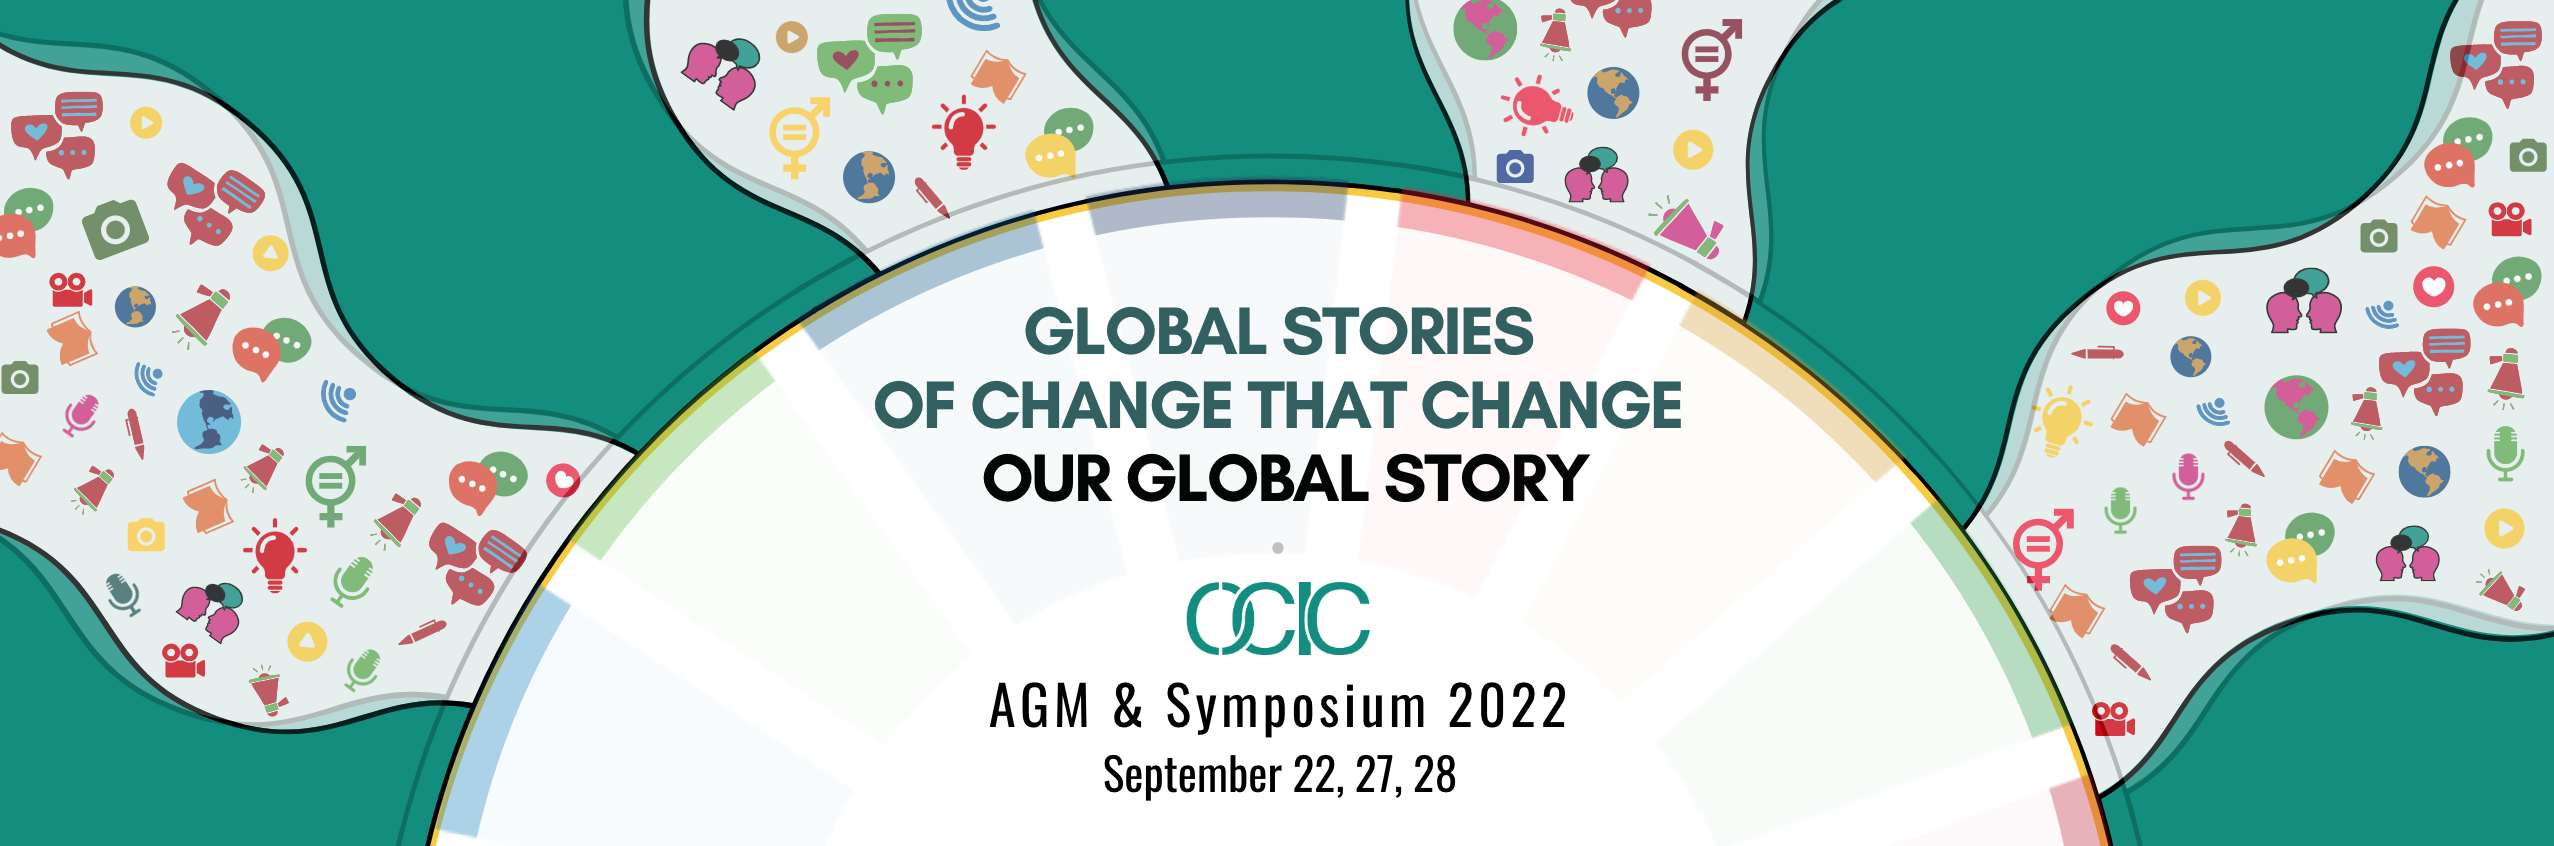 AGM & Symposium Banner 2022 Global Stories of Change that Change Our Global Story